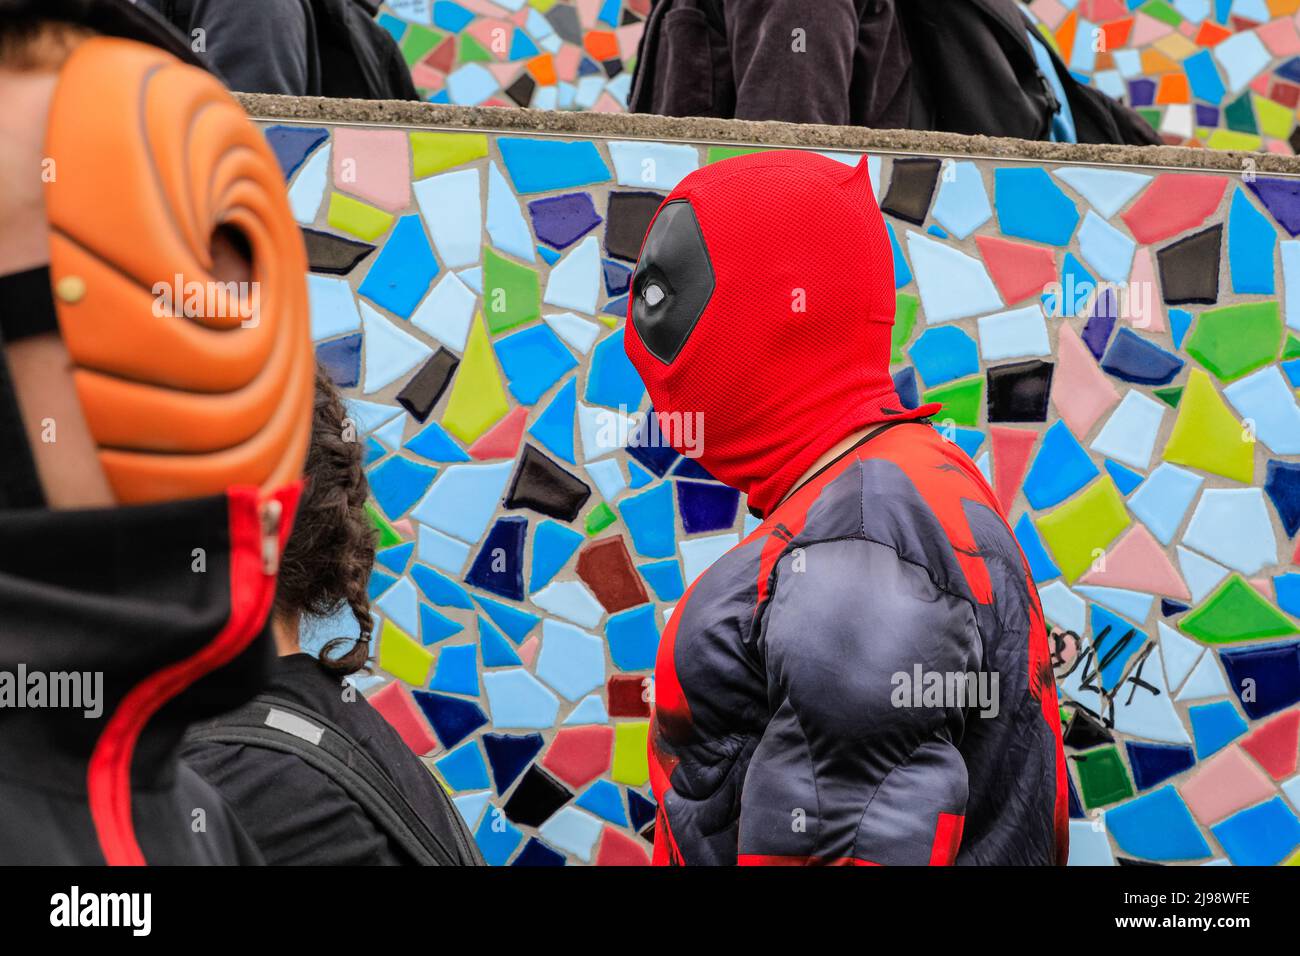 Düsseldorf, NRW, Germany. 21st May, 2022. Spiderman goes incognito. Tens of thousands of visitors and cosplayers enjoy the warm sunshine along the river Rhine embankment in their outfits inspired by Japanese anime, video and games. Stage performances, cosplay, stalls and demonstrations of Japanese culture, sports and traditions are featured at Düsseldorf's annual Japan Day, celebrating Japan and the Japanese community in the city. Düsseldorf is home to the largest Japanese community in Germany. Credit: Imageplotter/Alamy Live News Stock Photo